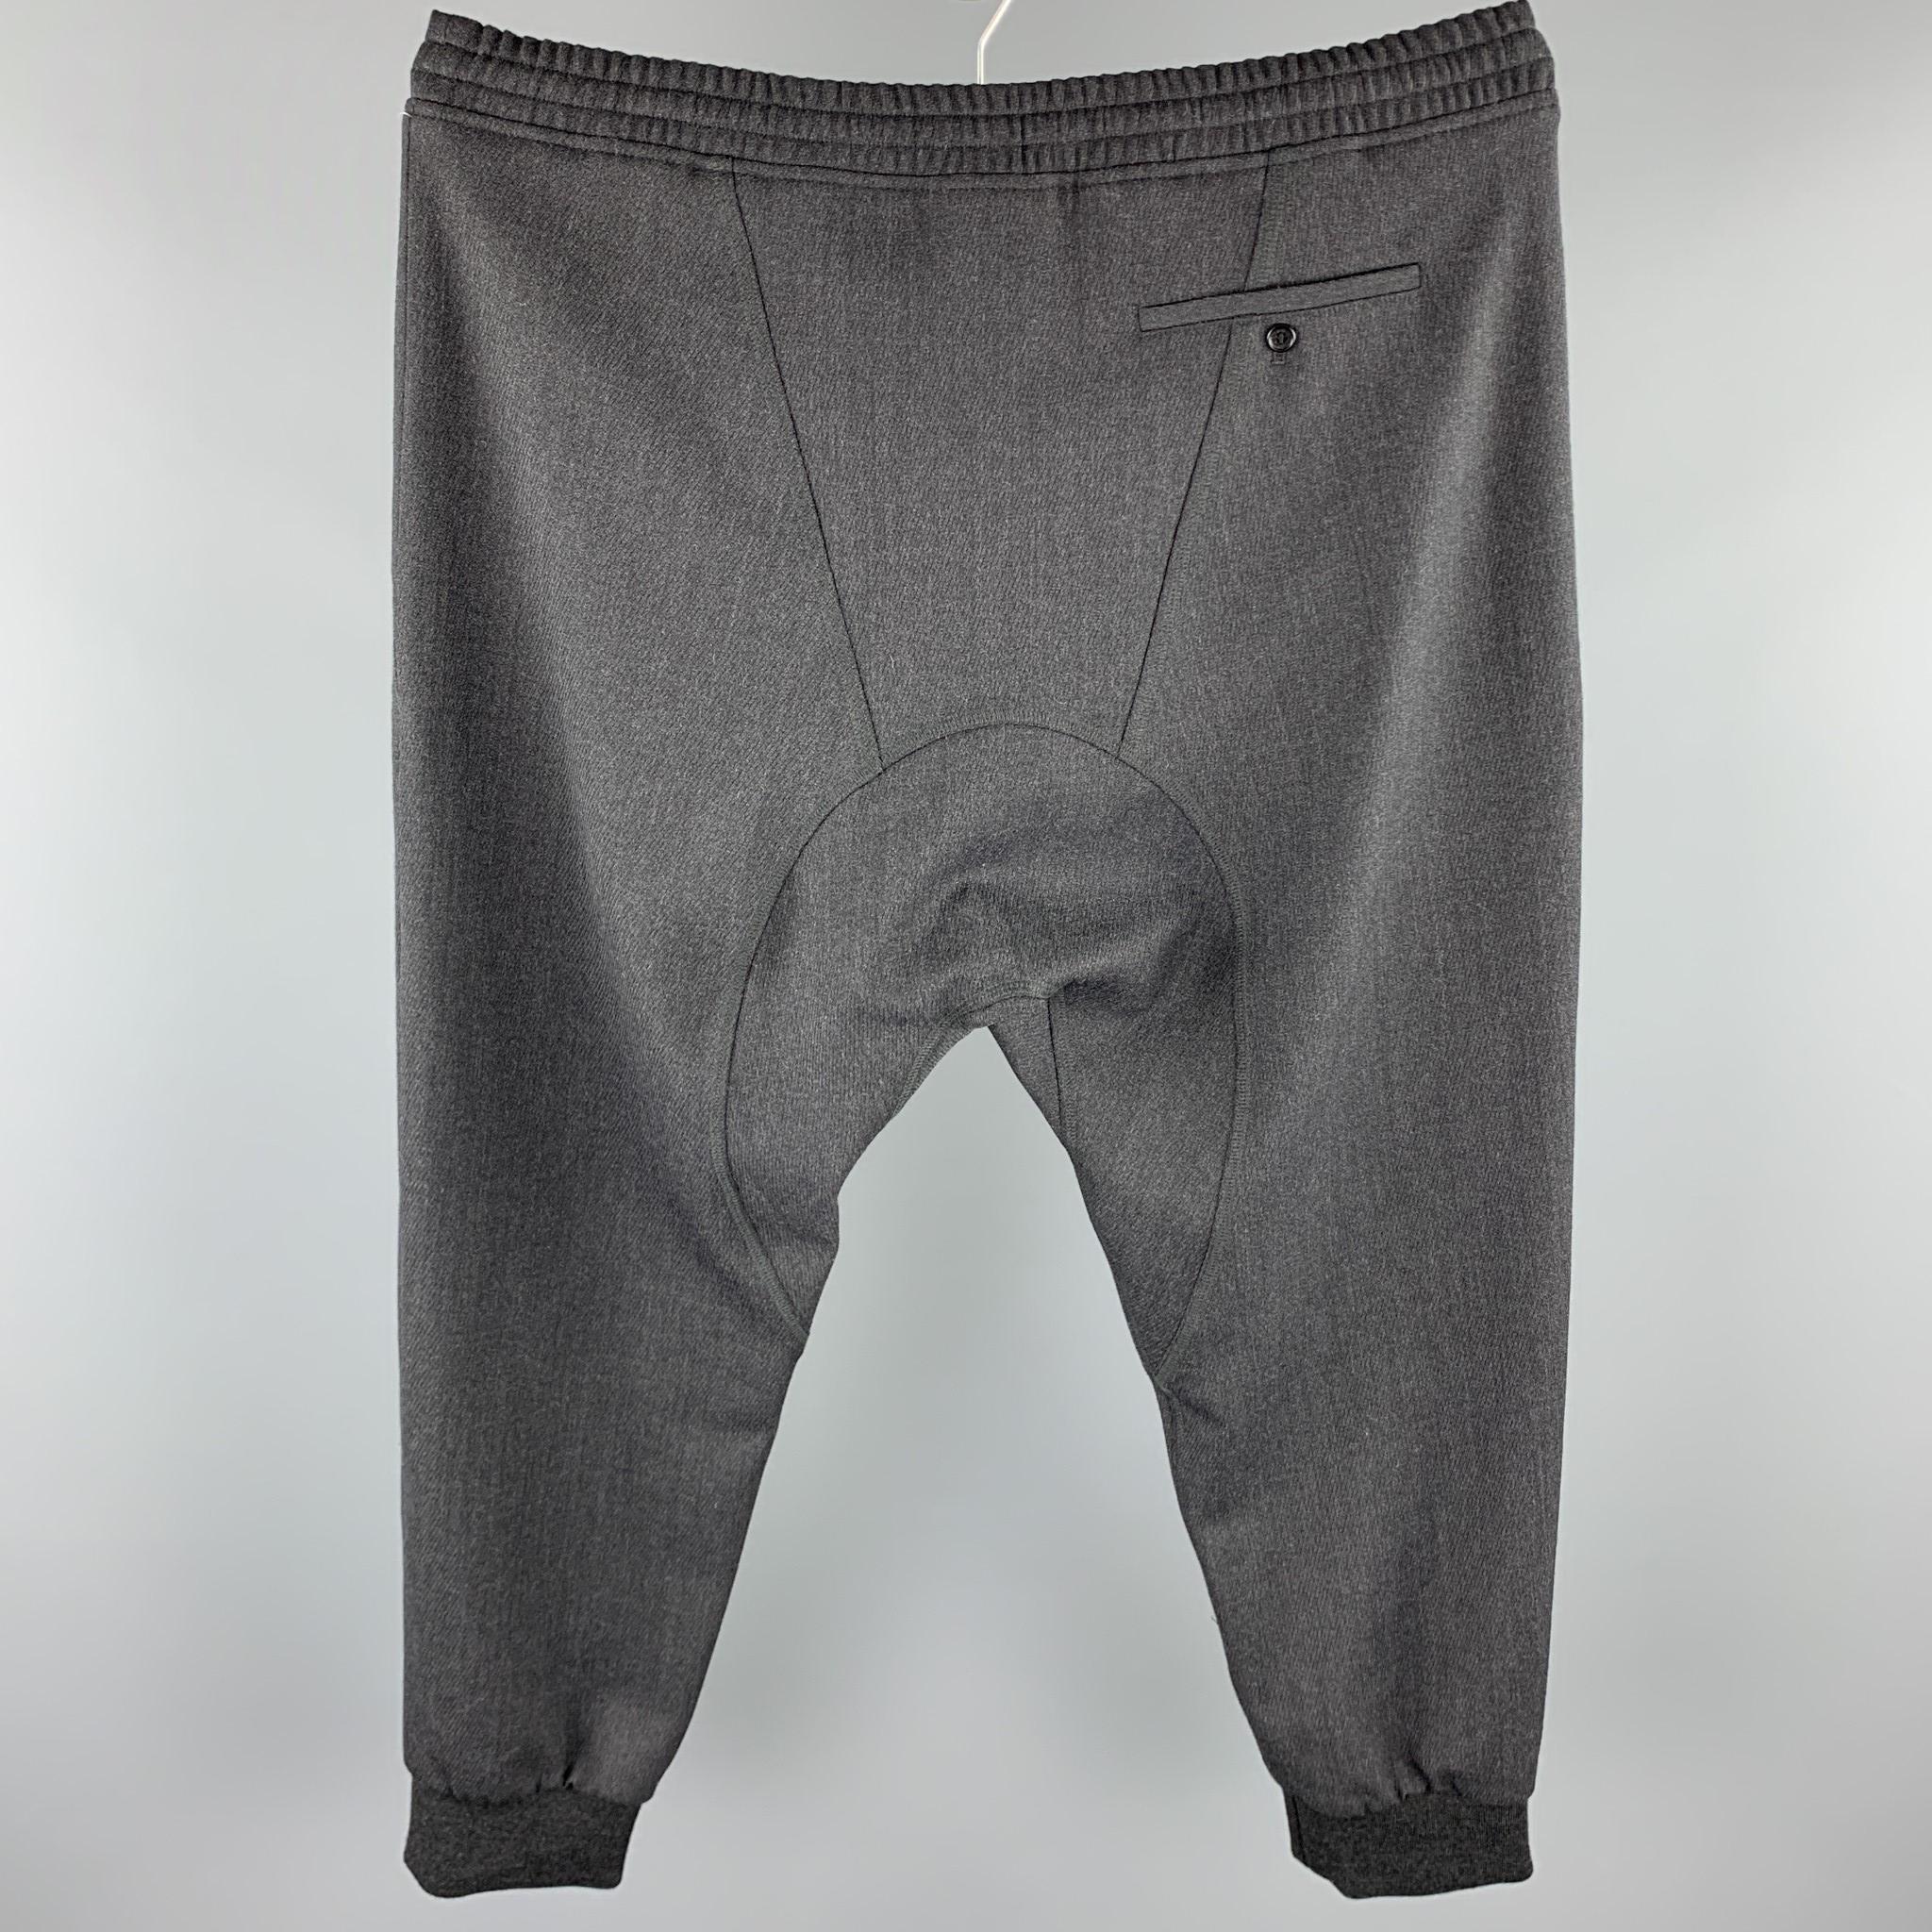 NEIL BARRETT casual pants comes in a charcoal wool blend featuring a slouch fit, low rise, elastic waistband, and a drawstring closure.

New With Tags. 
Marked: IT 54
Original Retail Price: $520.00

Measurements:

Waist: 38 in. 
Rise: 8 in. 
Inseam: